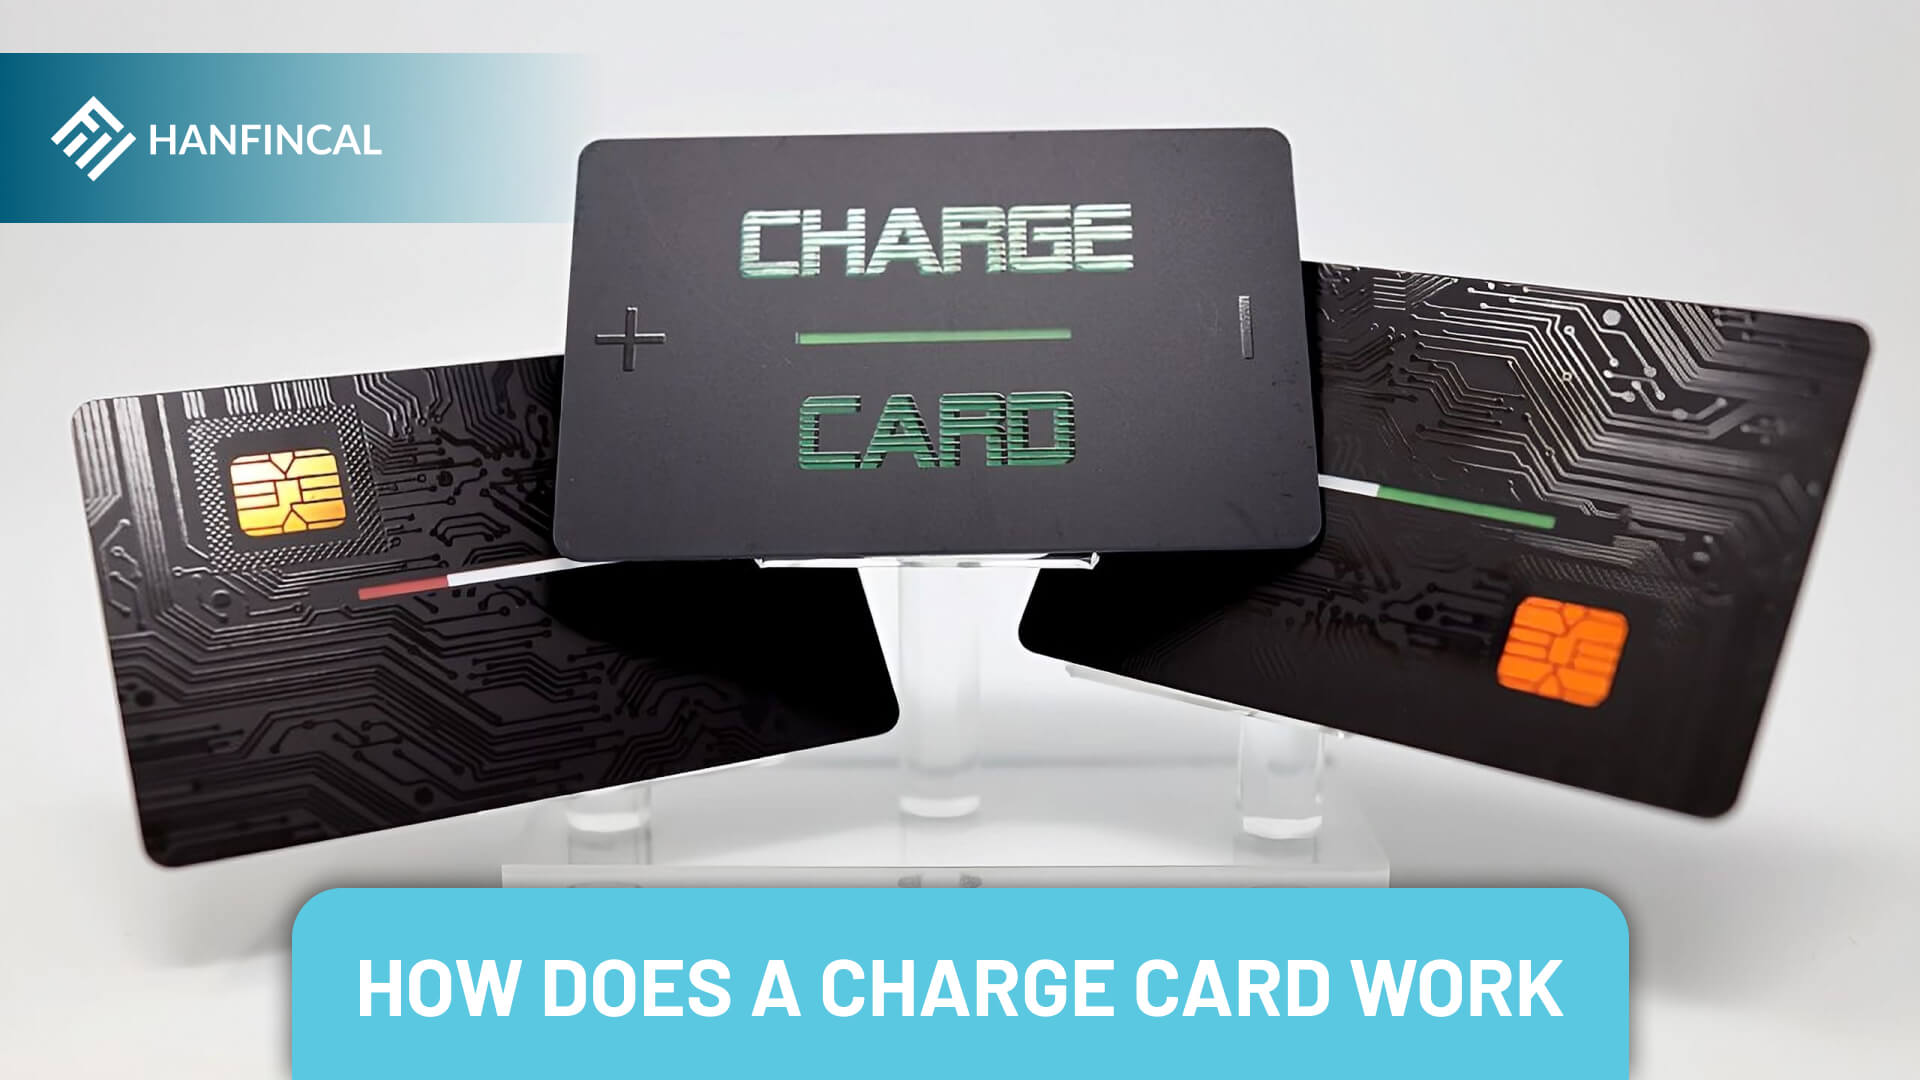 How does a charge card work?